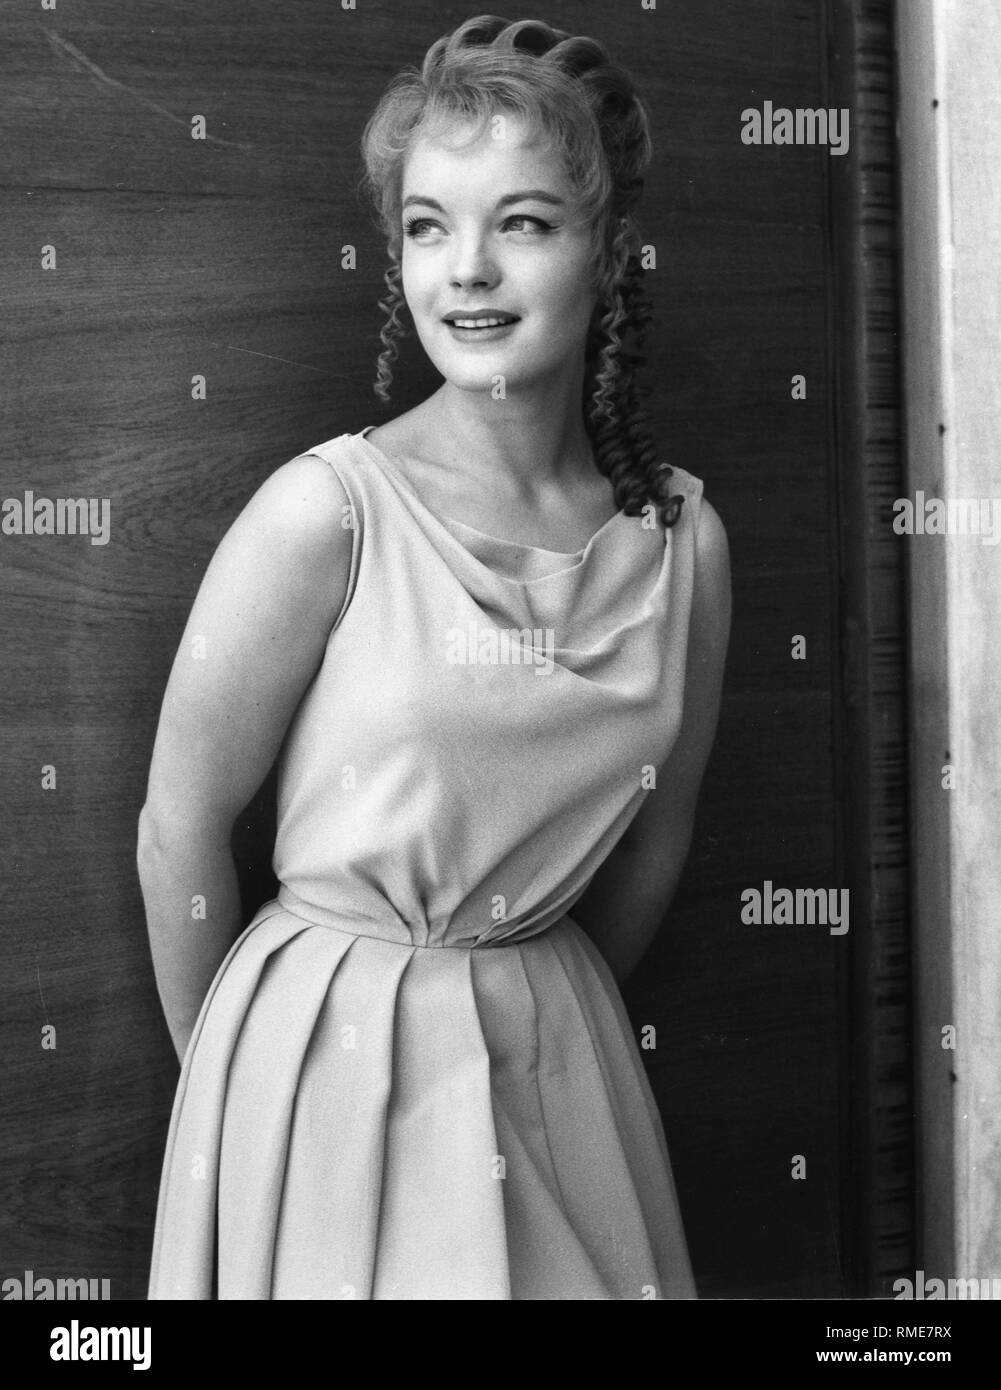 German Actress 1960 High Resolution Stock Photography and Images - Alamy